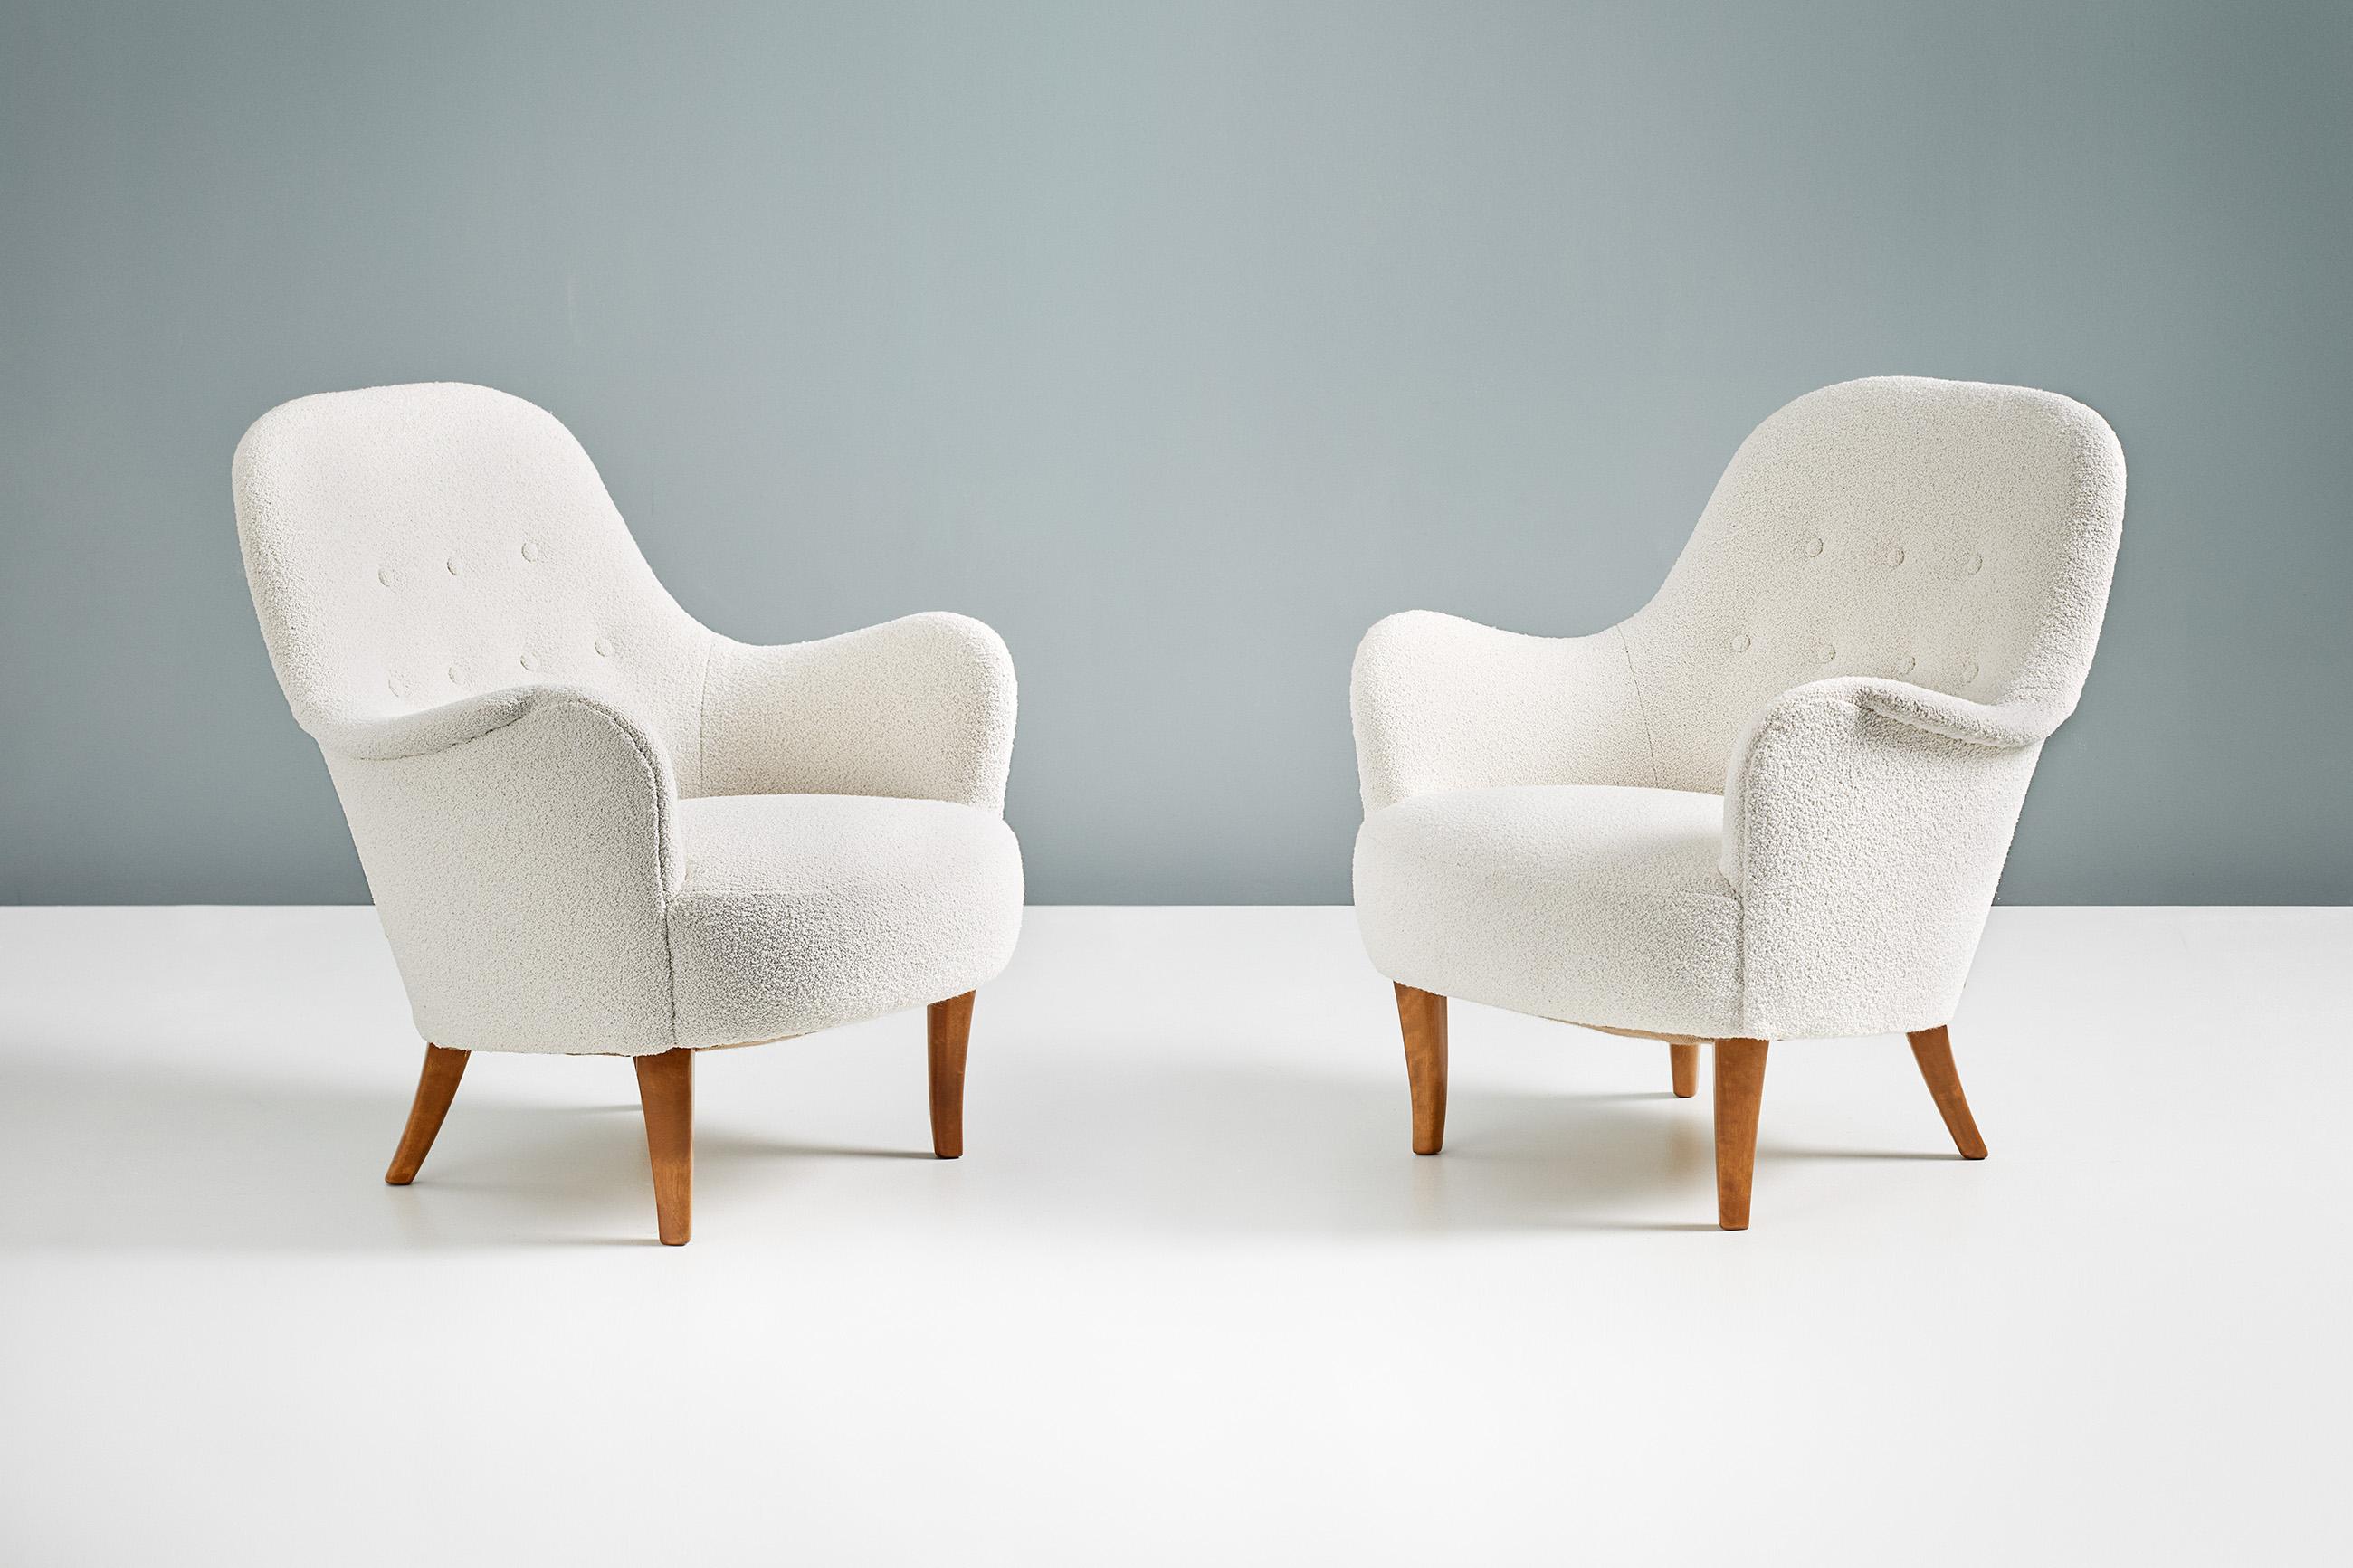 Carl Malmsten 'Cirkus' Lounge Chairs, 1950s

A pair of armchairs designed by Carl Malmsten in 1950s and produced in Sweden. This pair have been reupholstered in chase Erwin 'Embrace Cotton White', a luxurious off-white wool-cotton blend fabric.